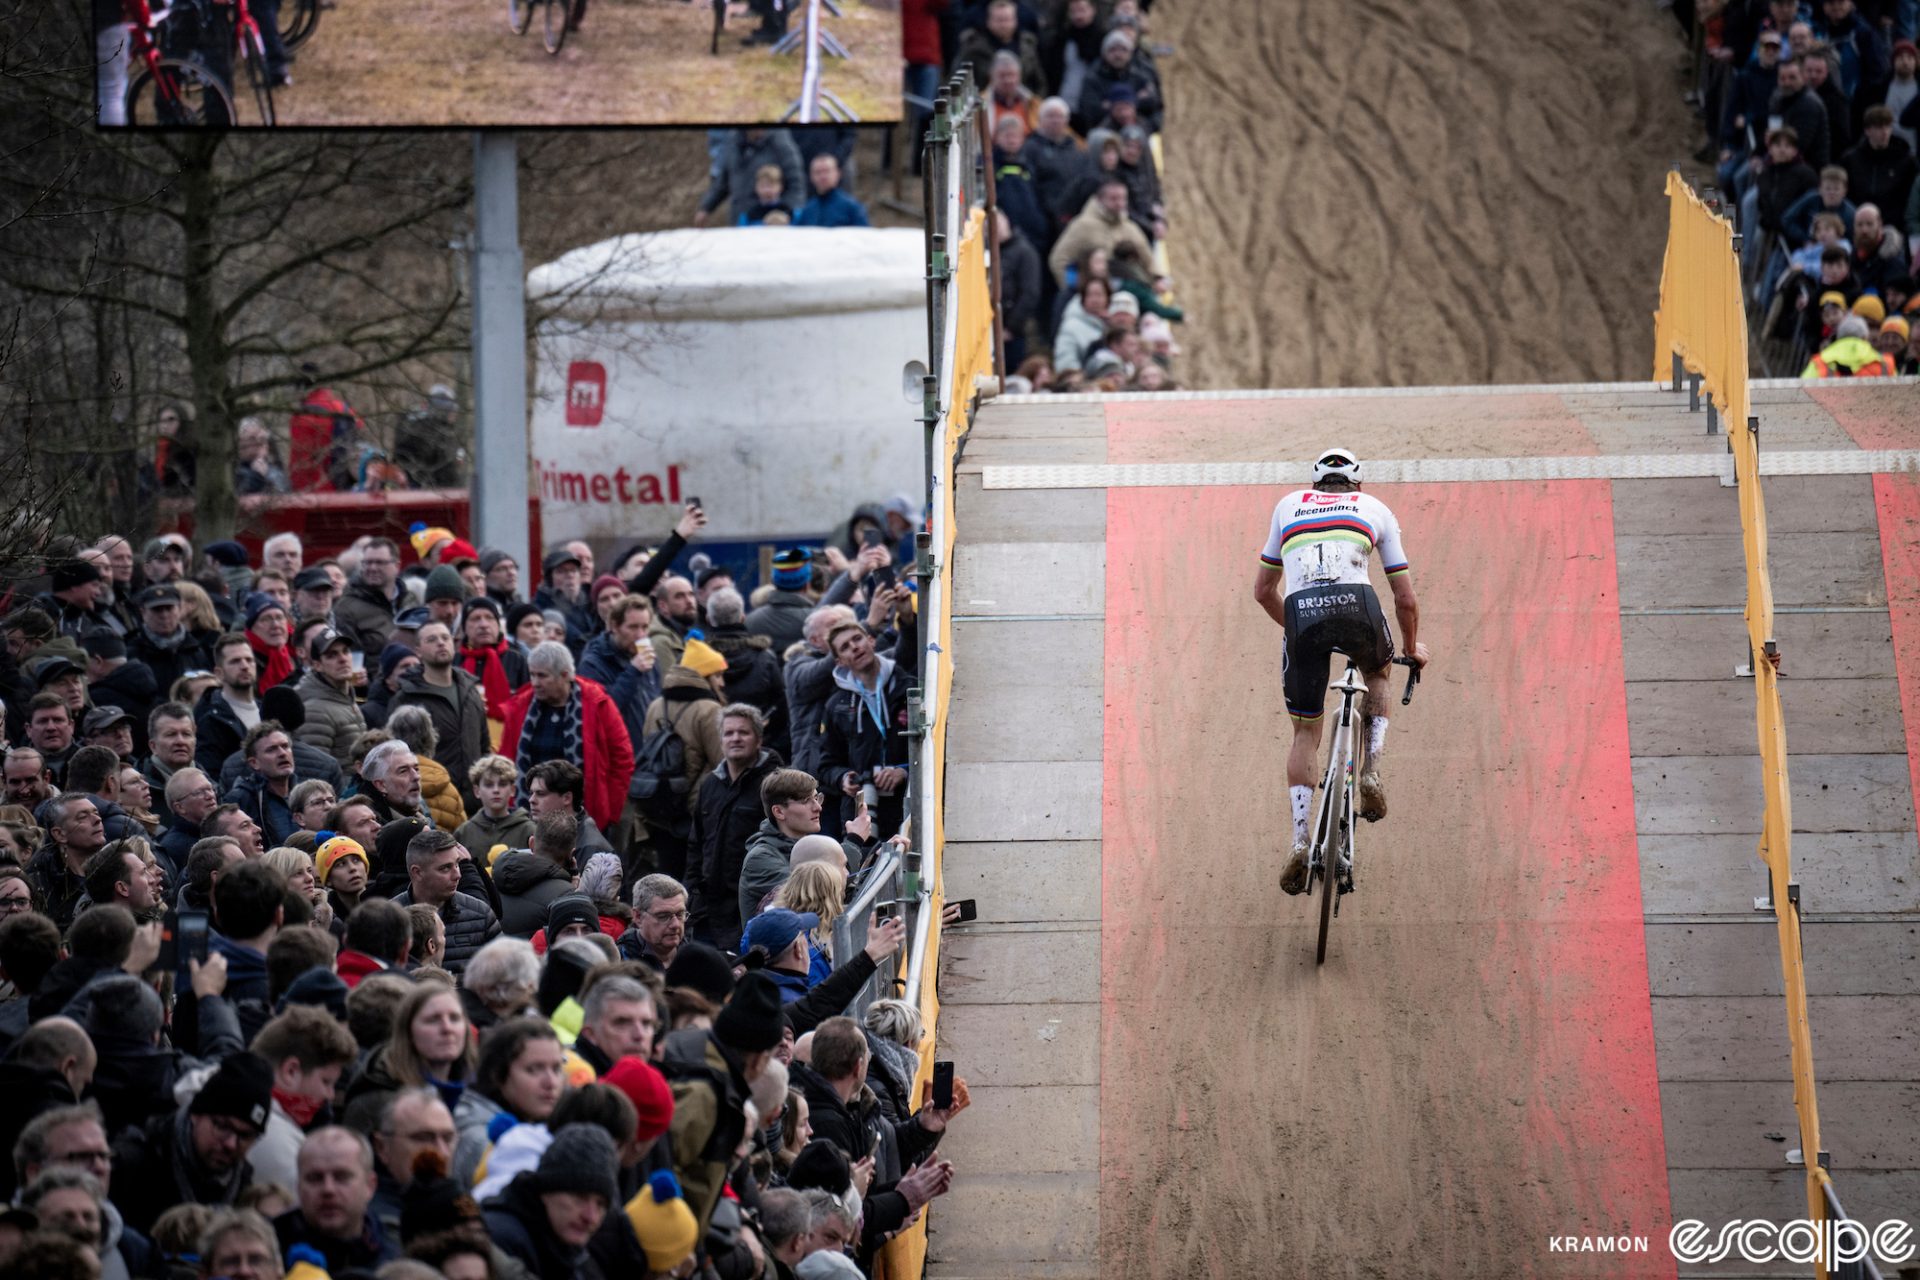 Mathieu van der Poel rides a flyover bridge at the X20 Koksijde cyclocross race. He's all alone, with crowds of fans watching him climb out of the saddle over the bridge.